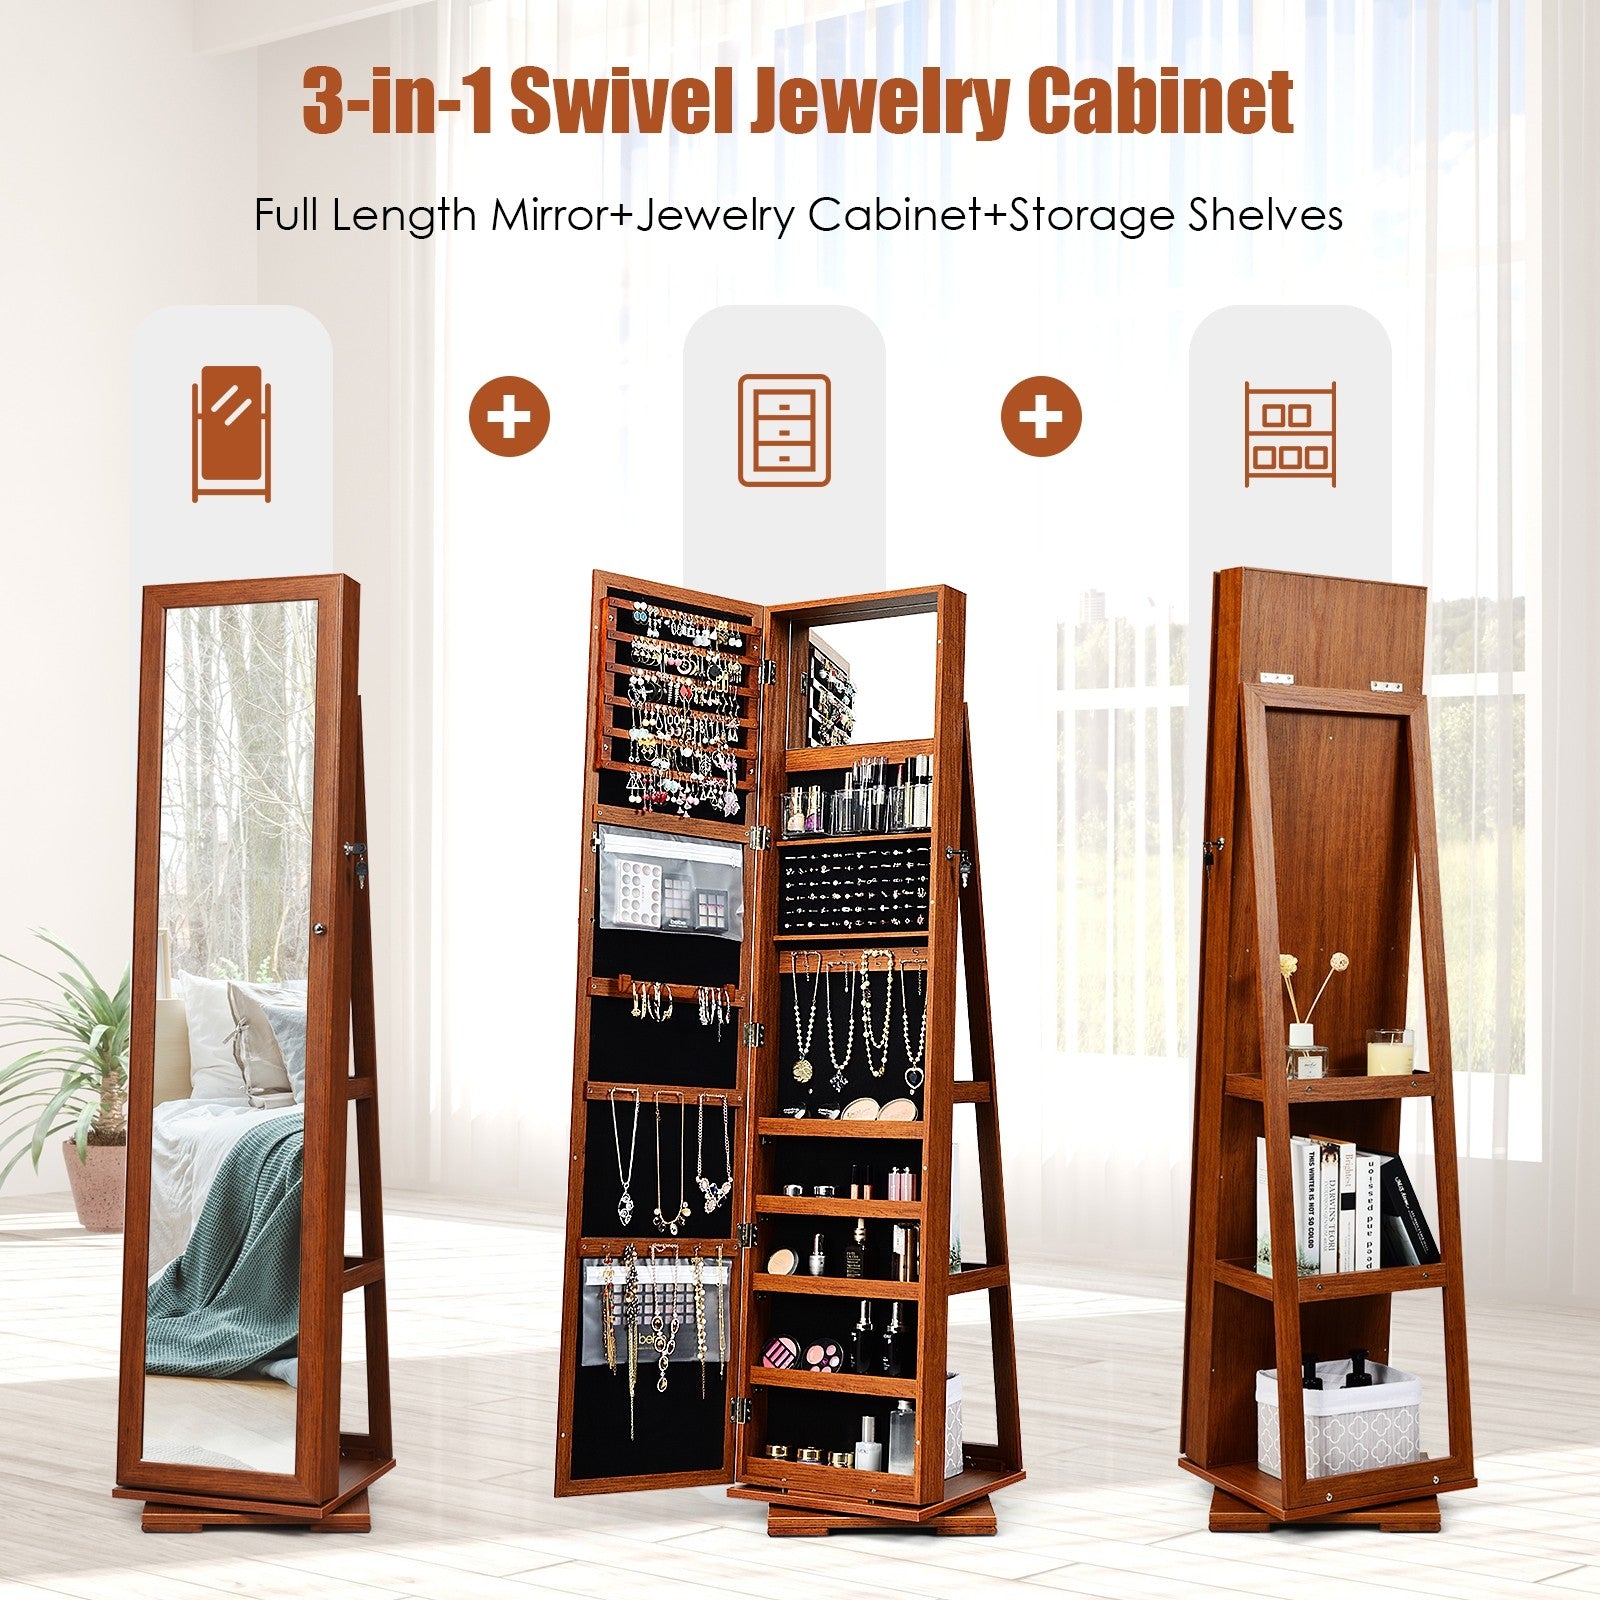 CHARMAID | 360-degree Rotating Jewelry Armoire with Higher Full Length Mirror